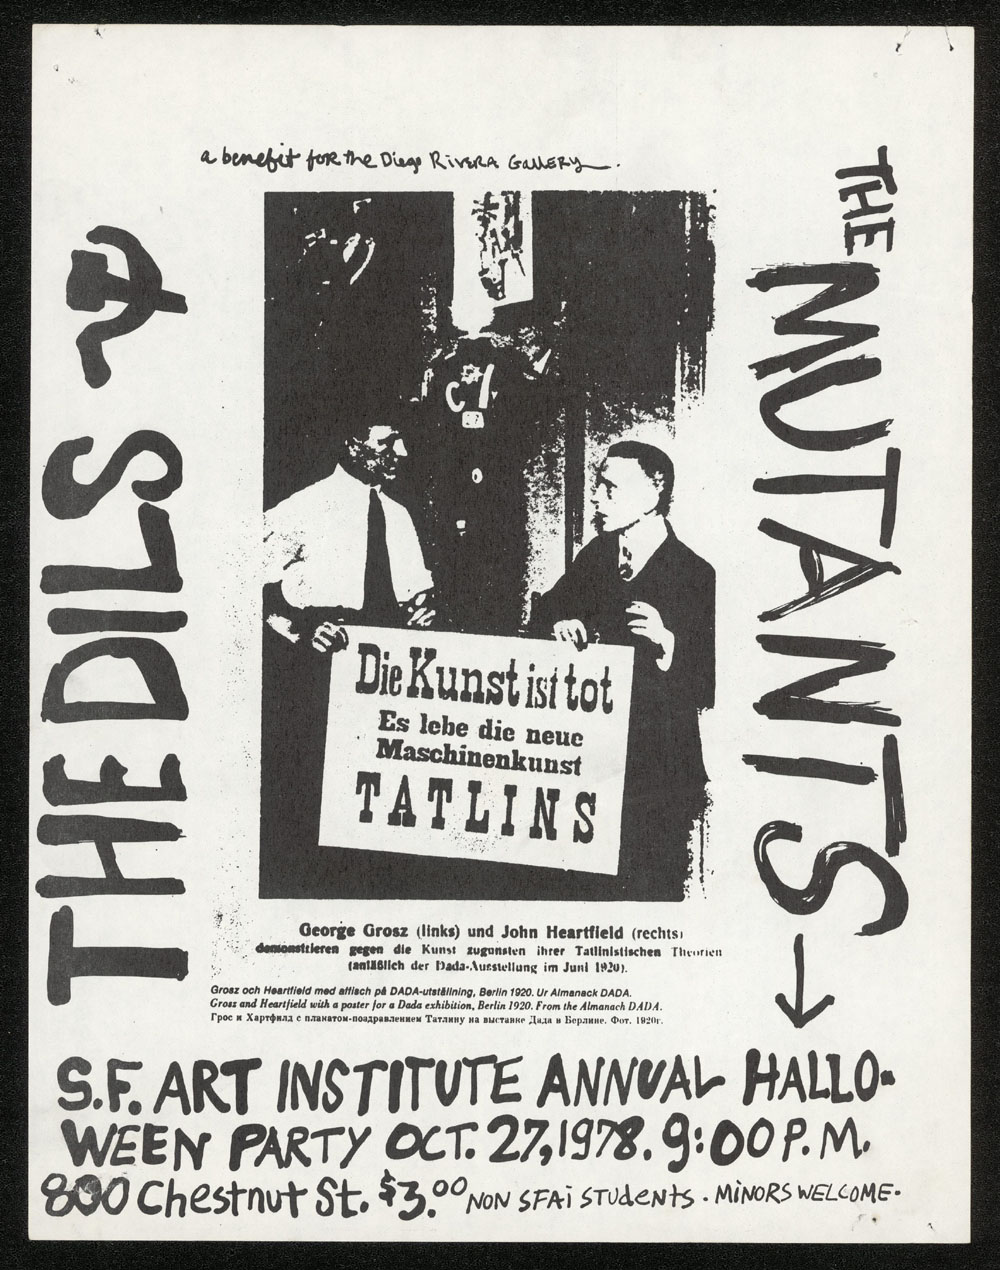 DILS w/ Mutants at SF Art Institute